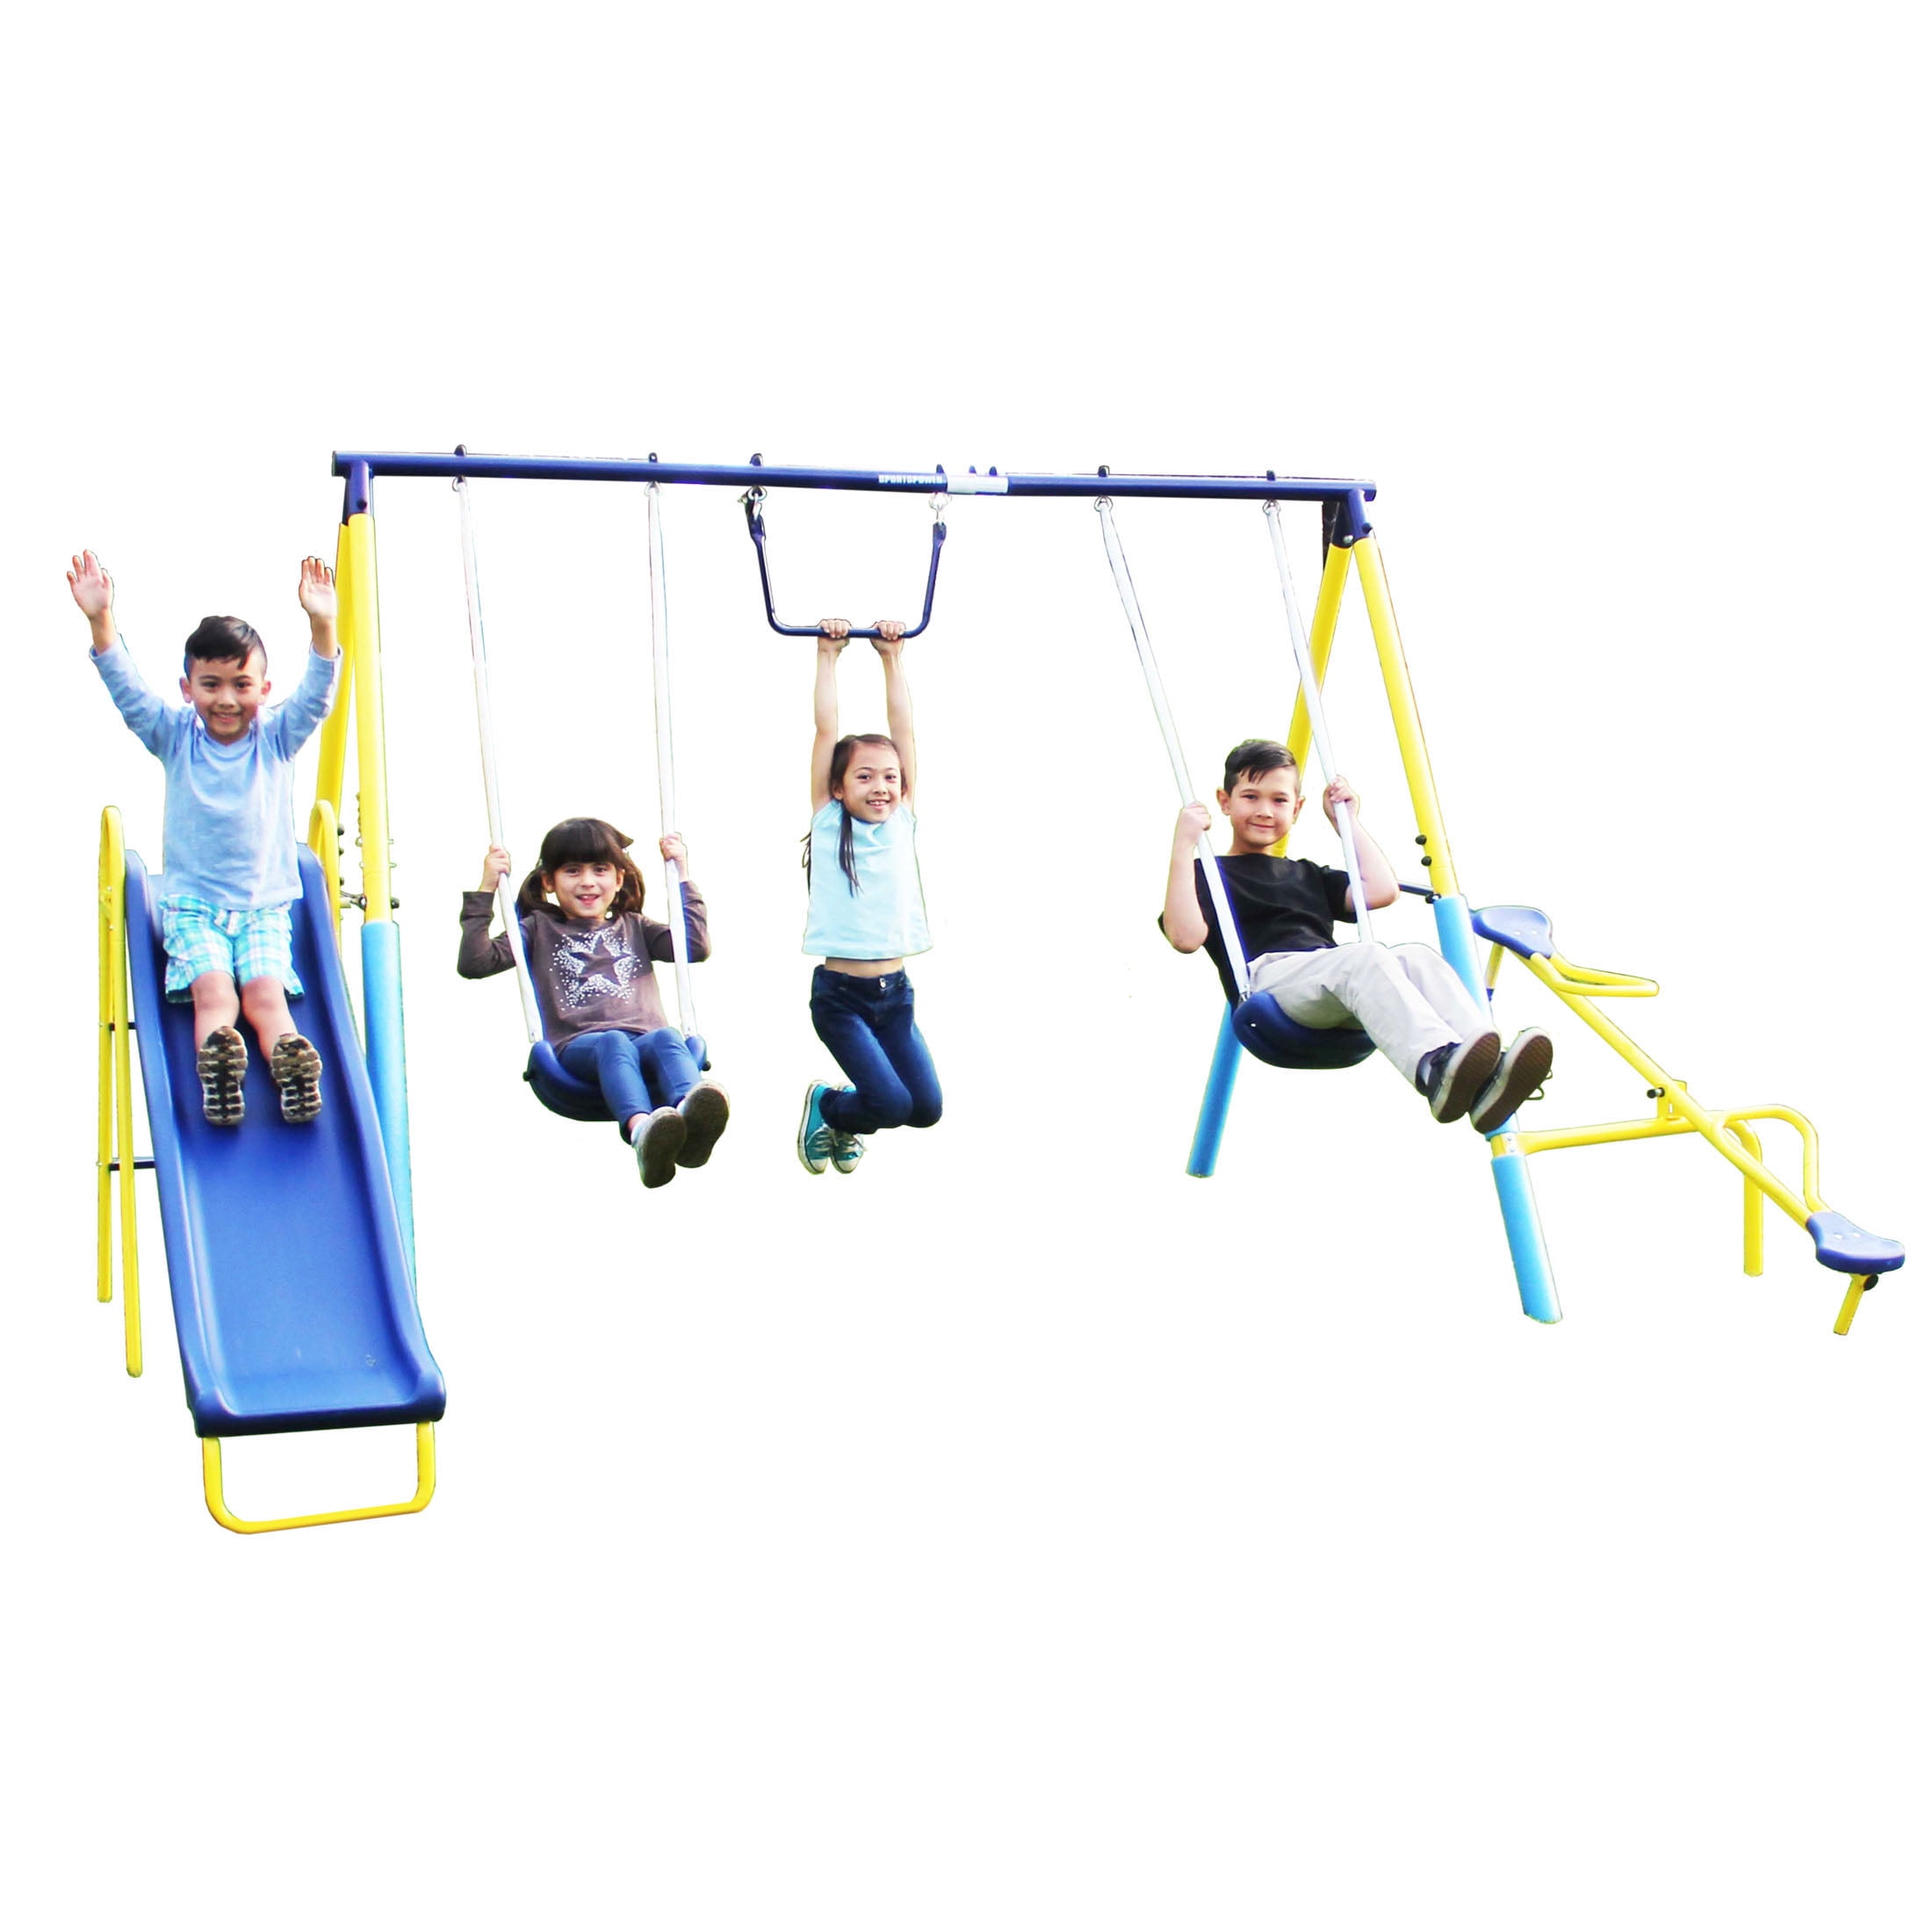 Sportspower Outdoor Super First Metal Swing Set with Trapeze, Teeter-Totter, and 6ft Heavy Duty Slide - 1